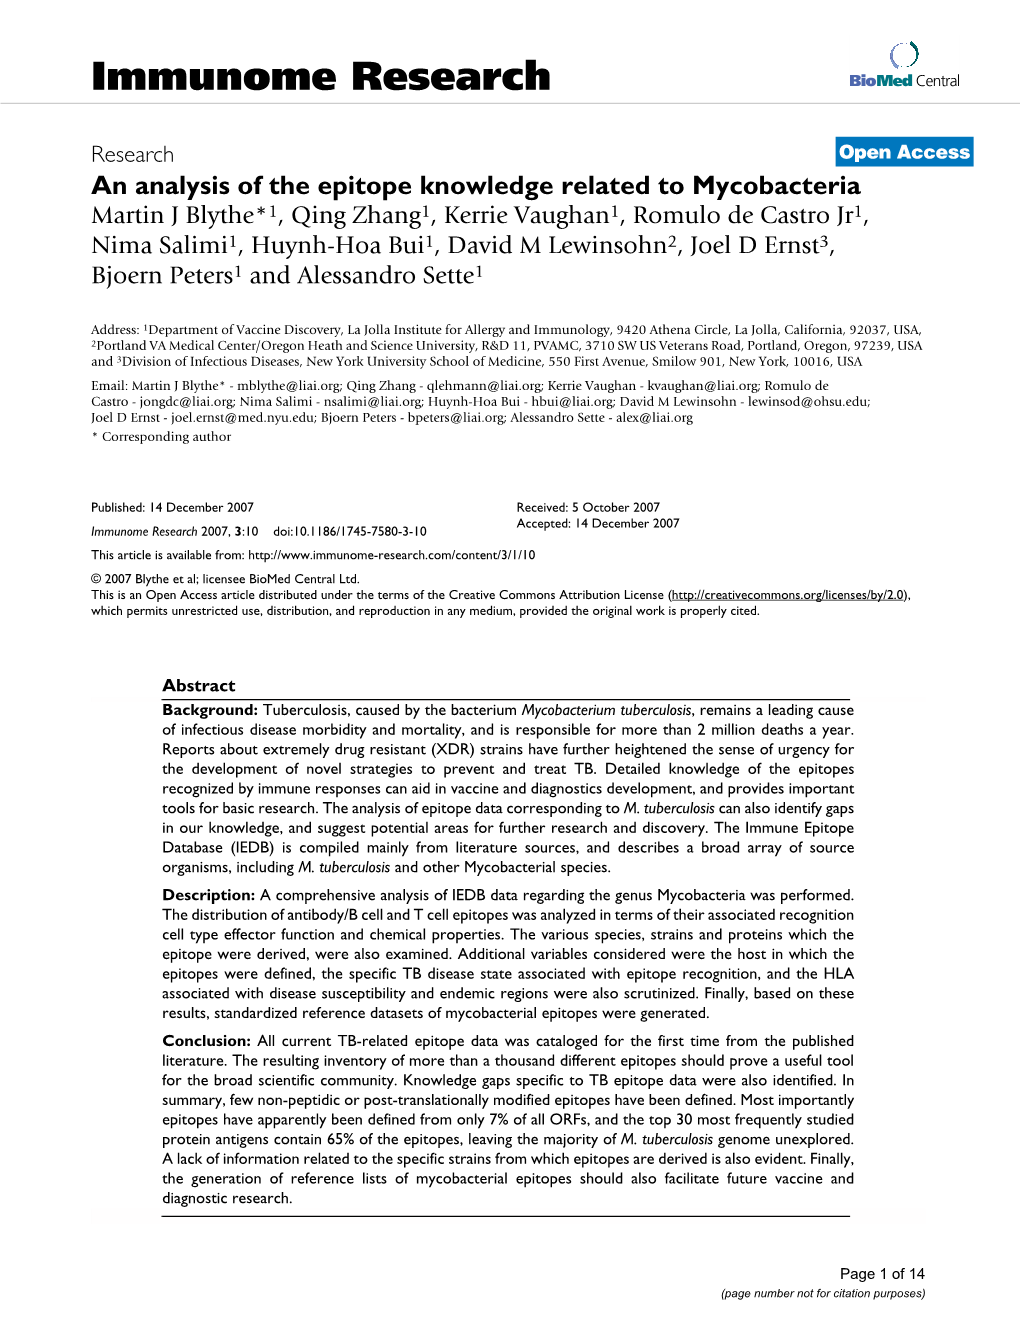 An Analysis of the Epitope Knowledge Related To